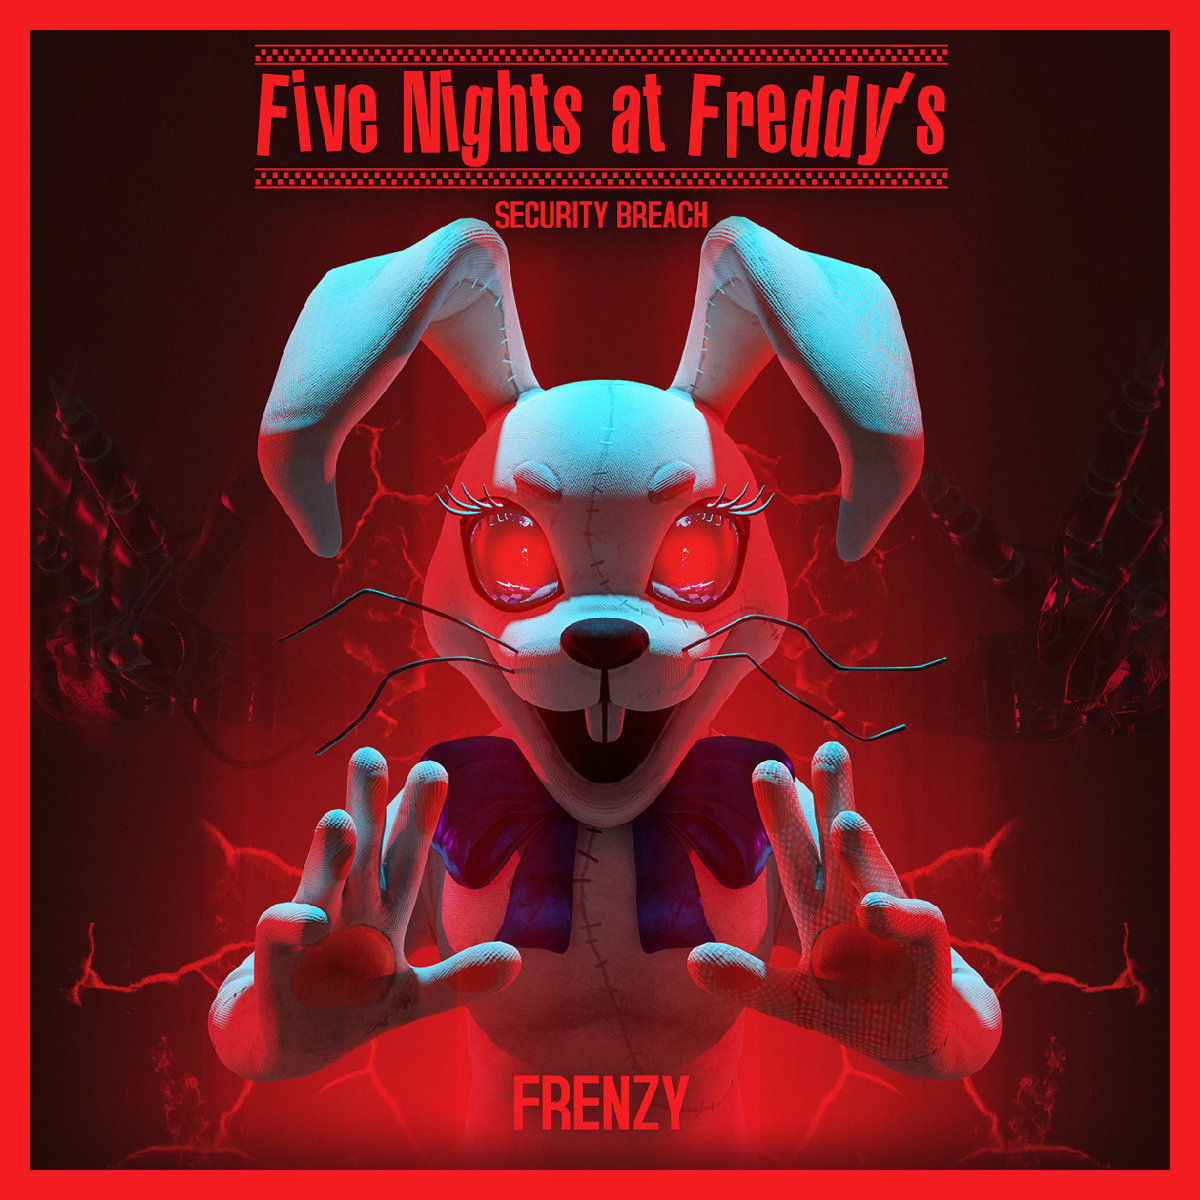 Five Nights at Freddy's - Security Breach (Frenzy) | SCRATON